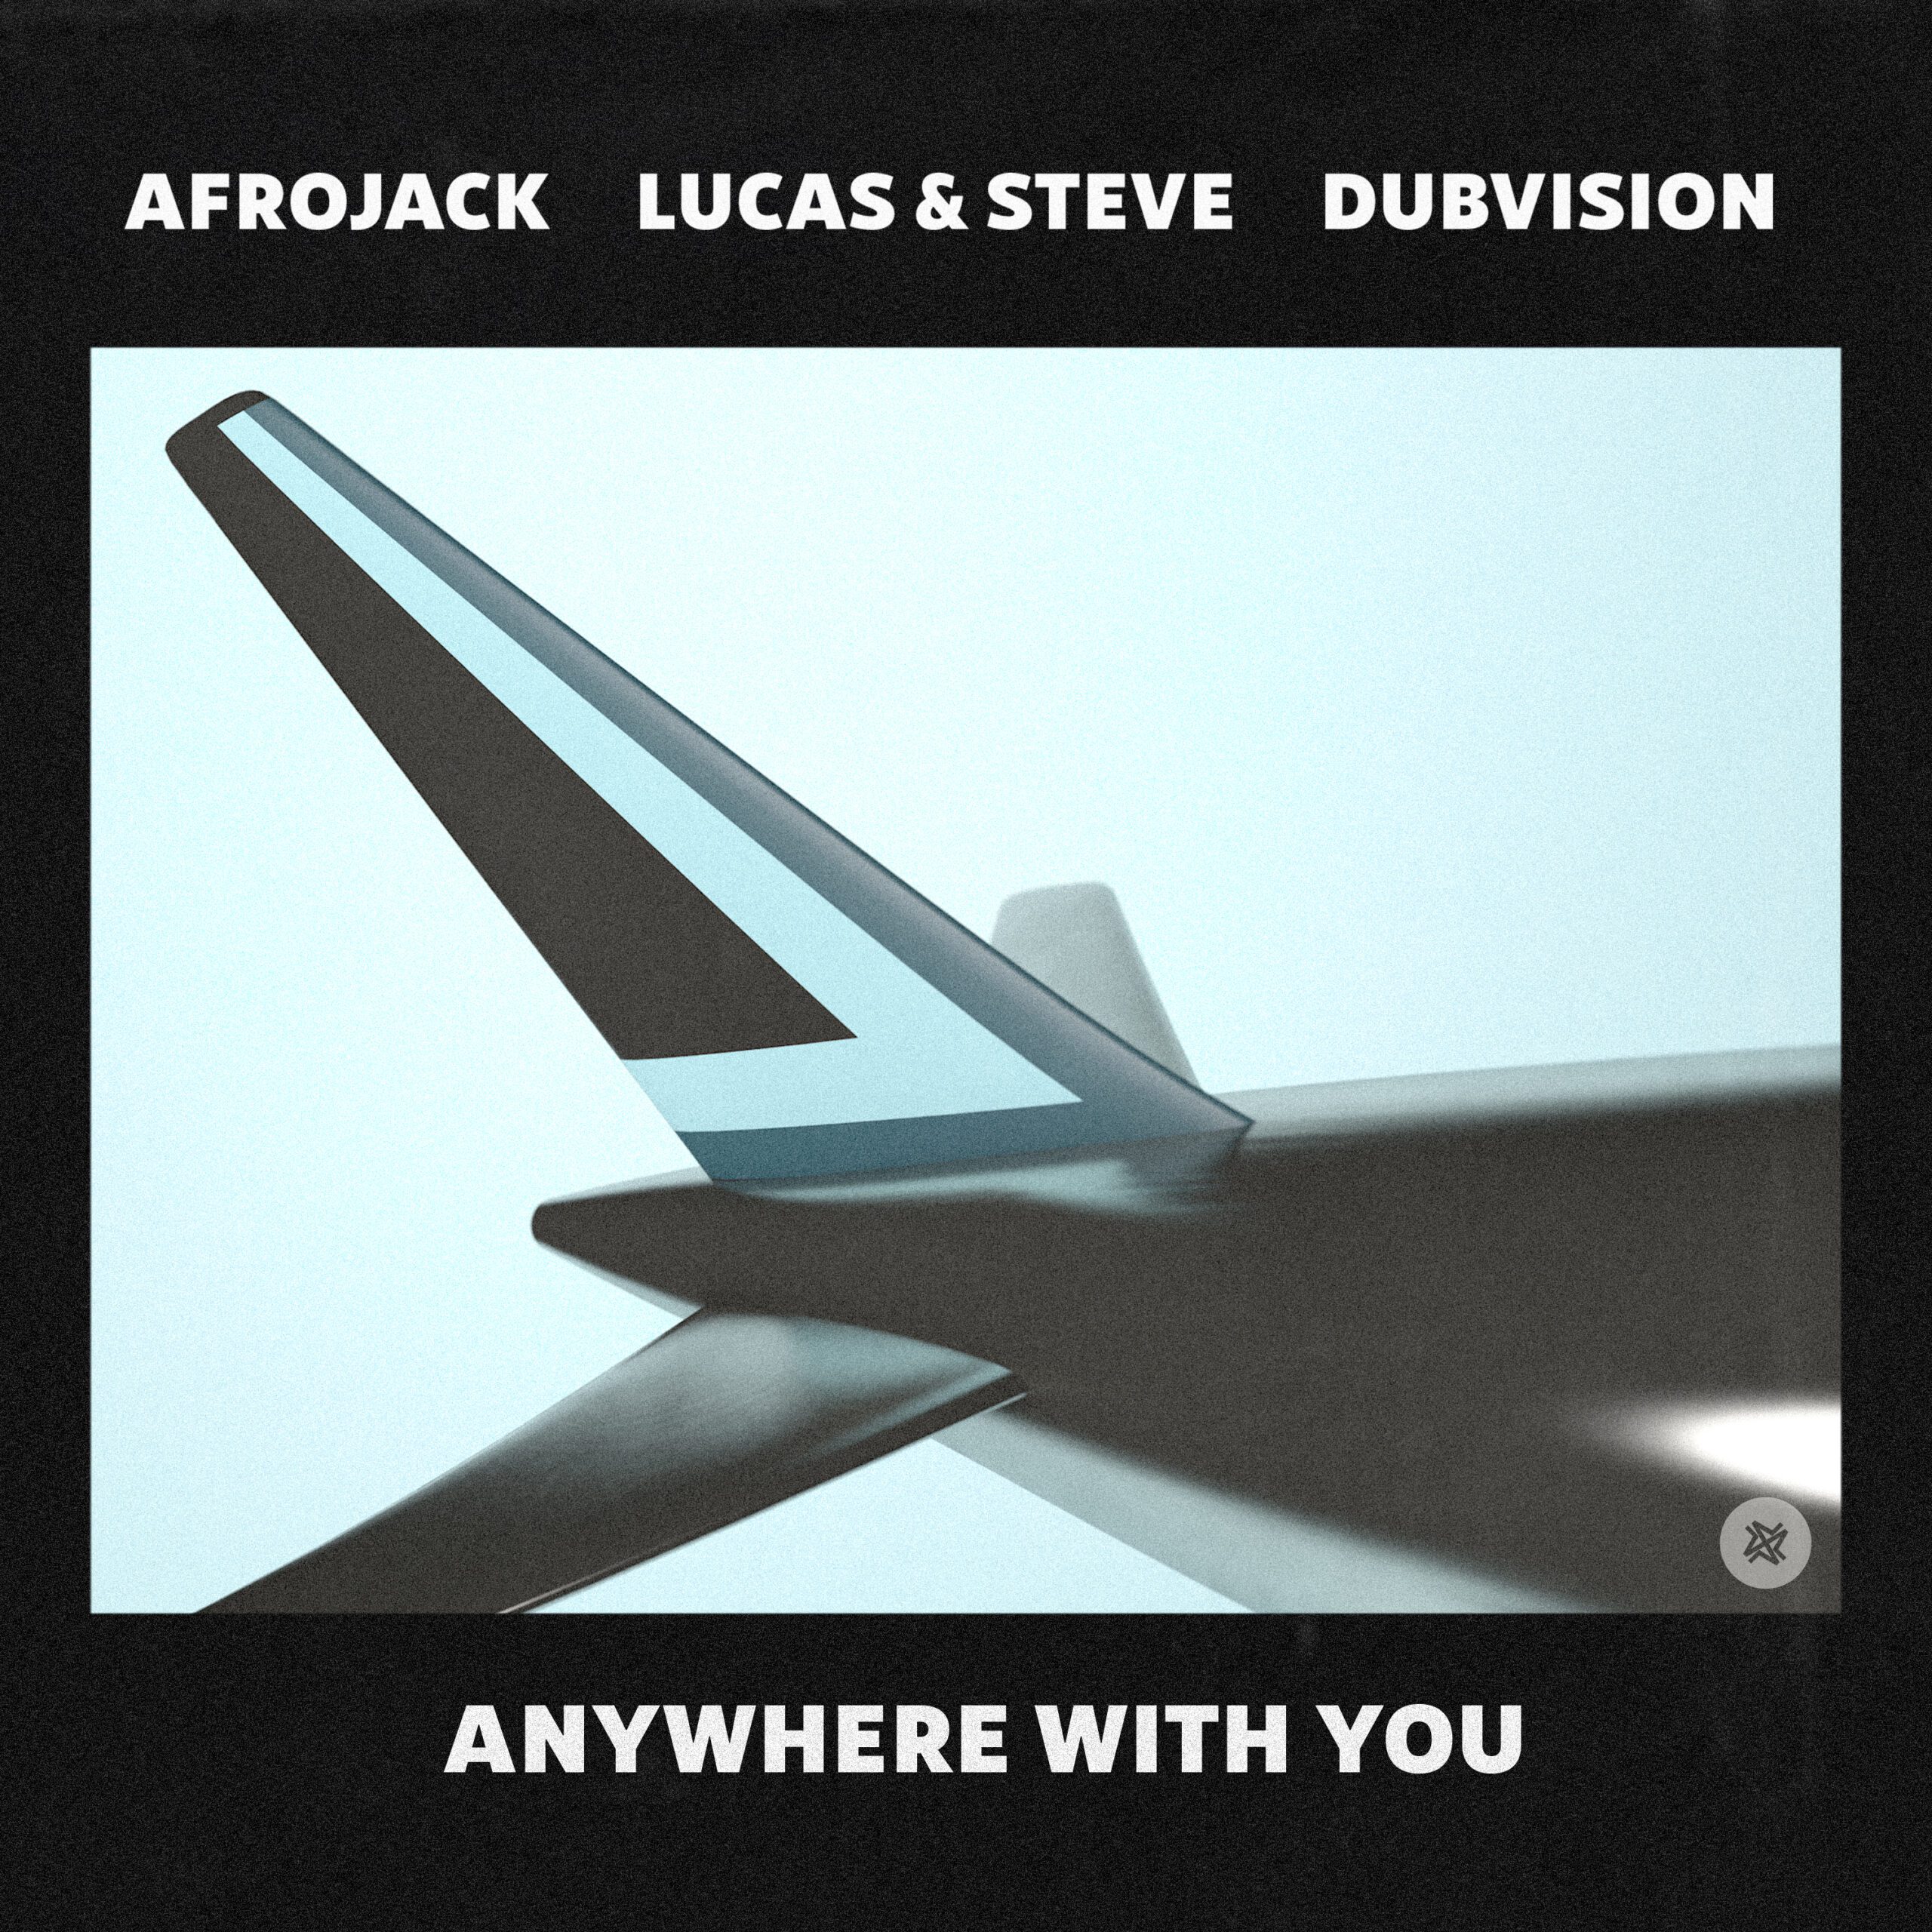 AFROJACK, Lucas & Steve, DubVision – Anywhere With You